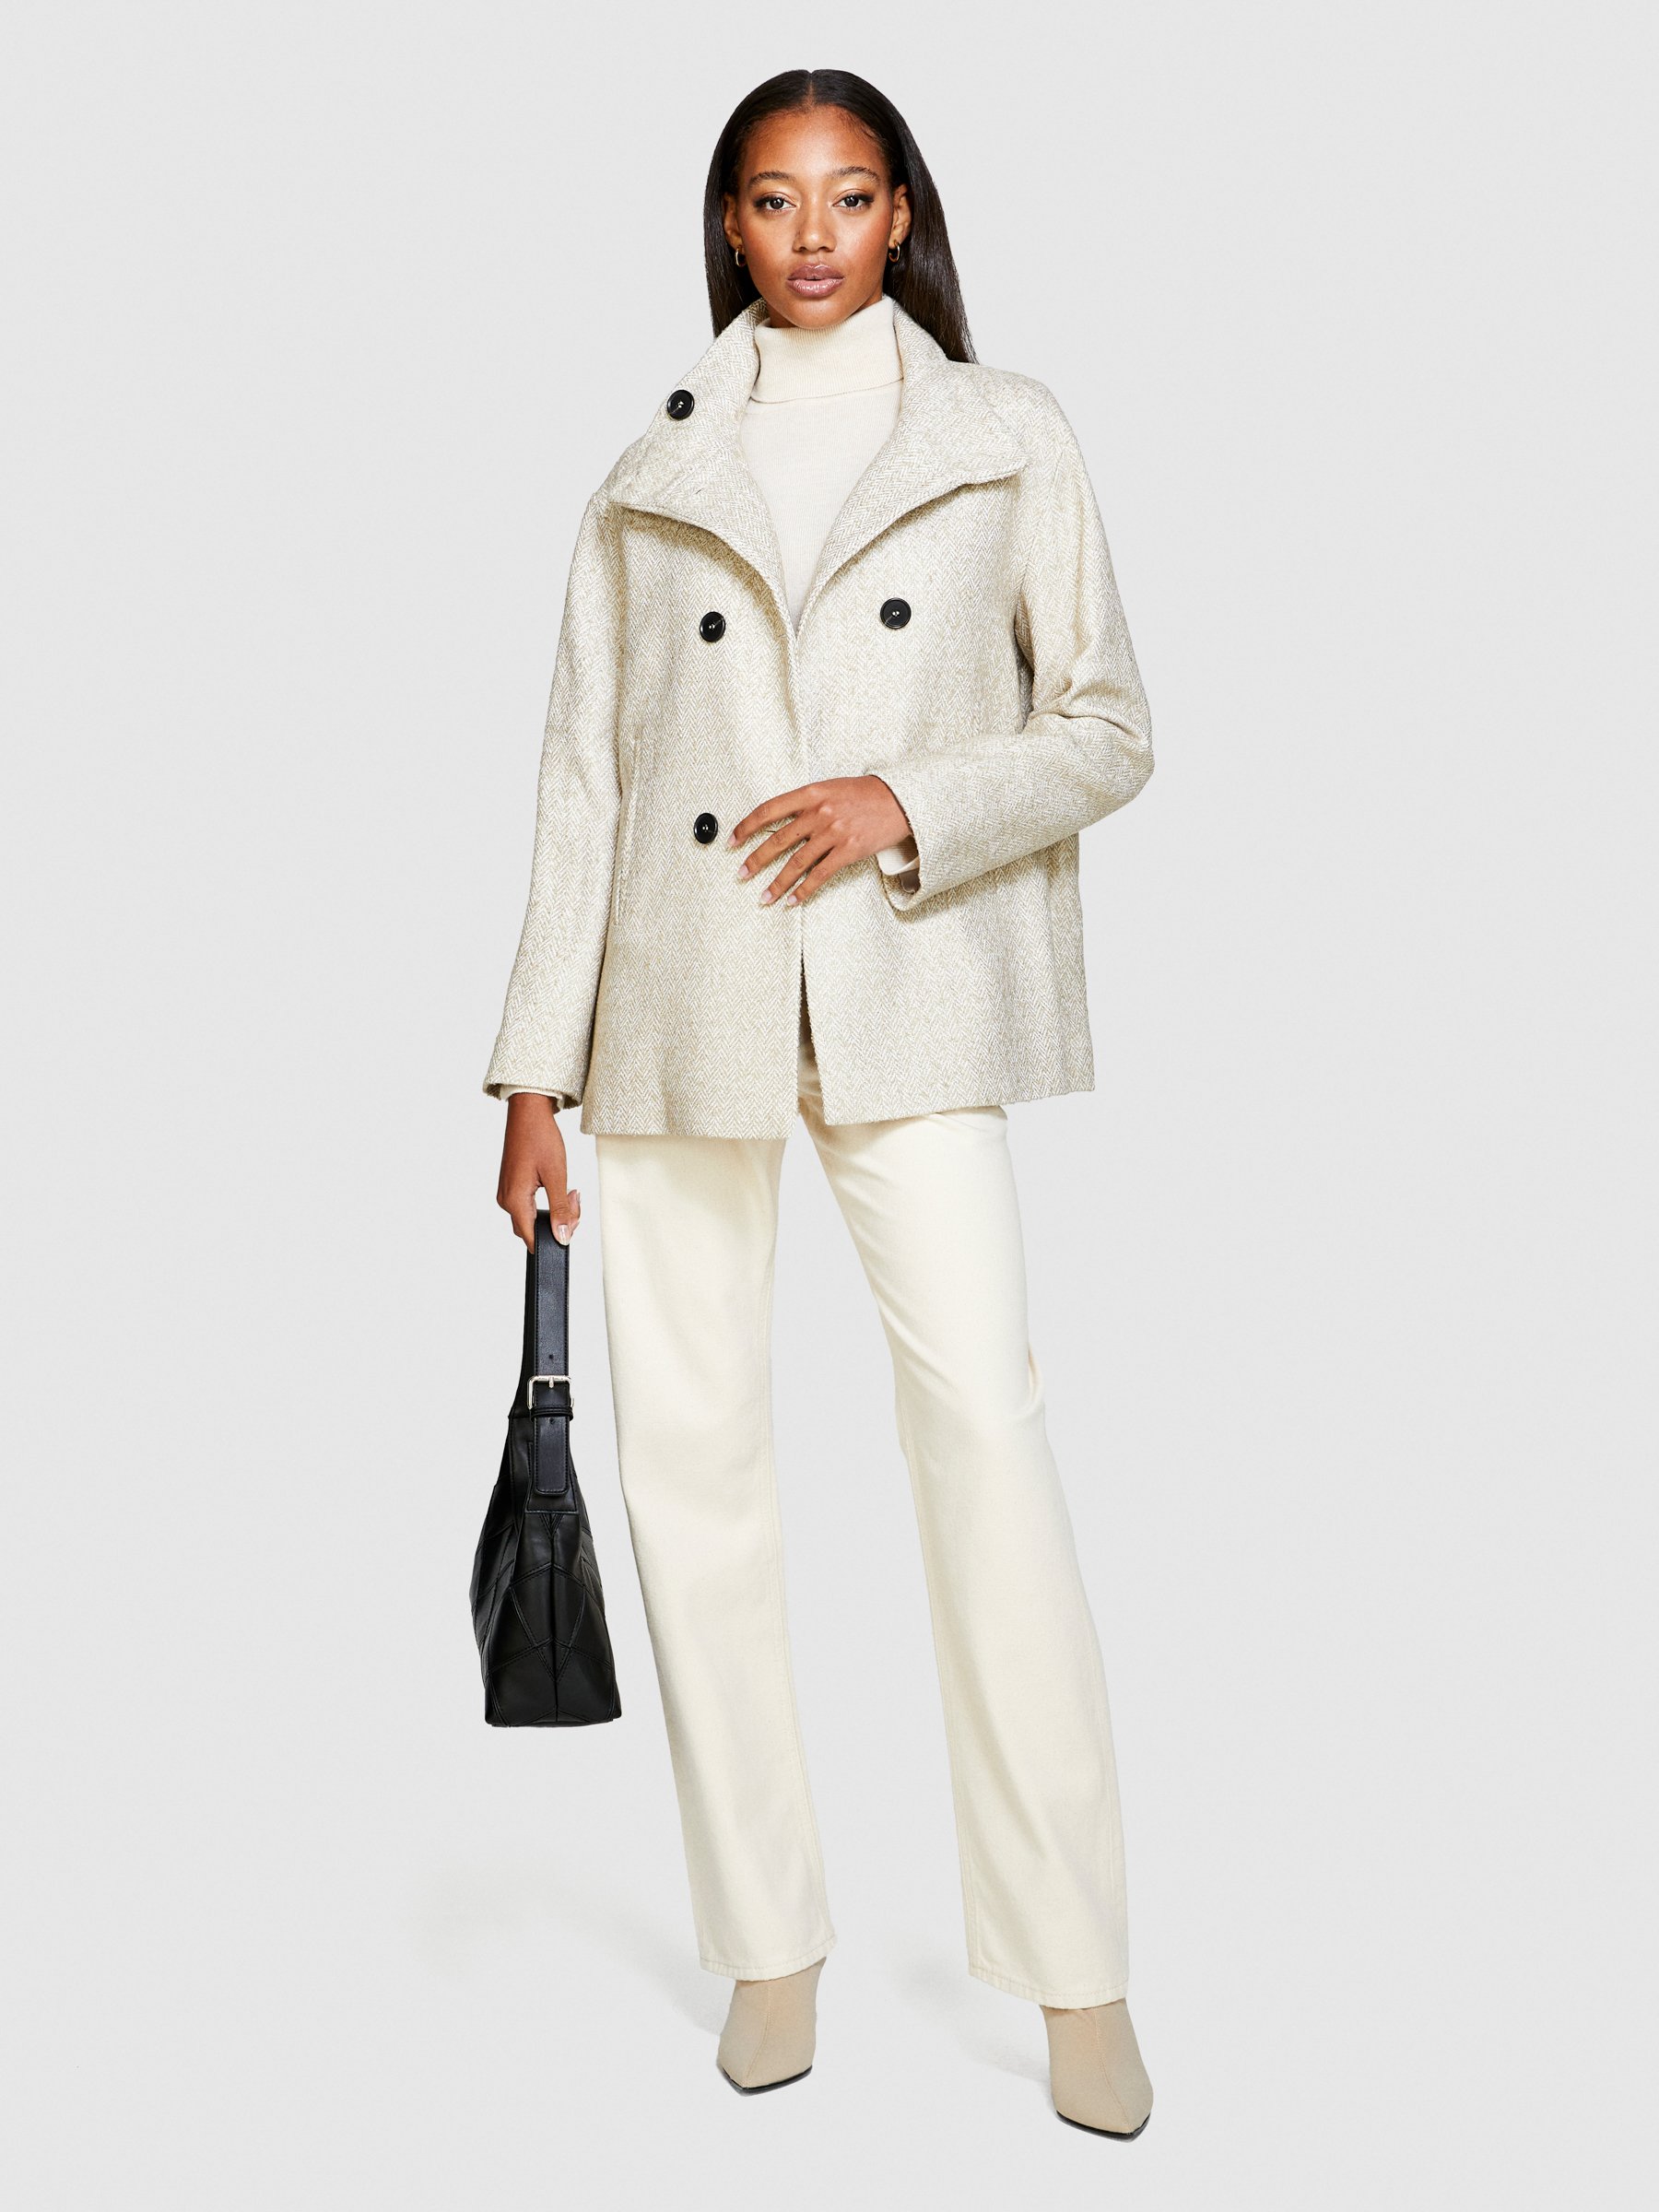 Sisley - Coat With High Collar, Woman, Creamy White, Size: 42